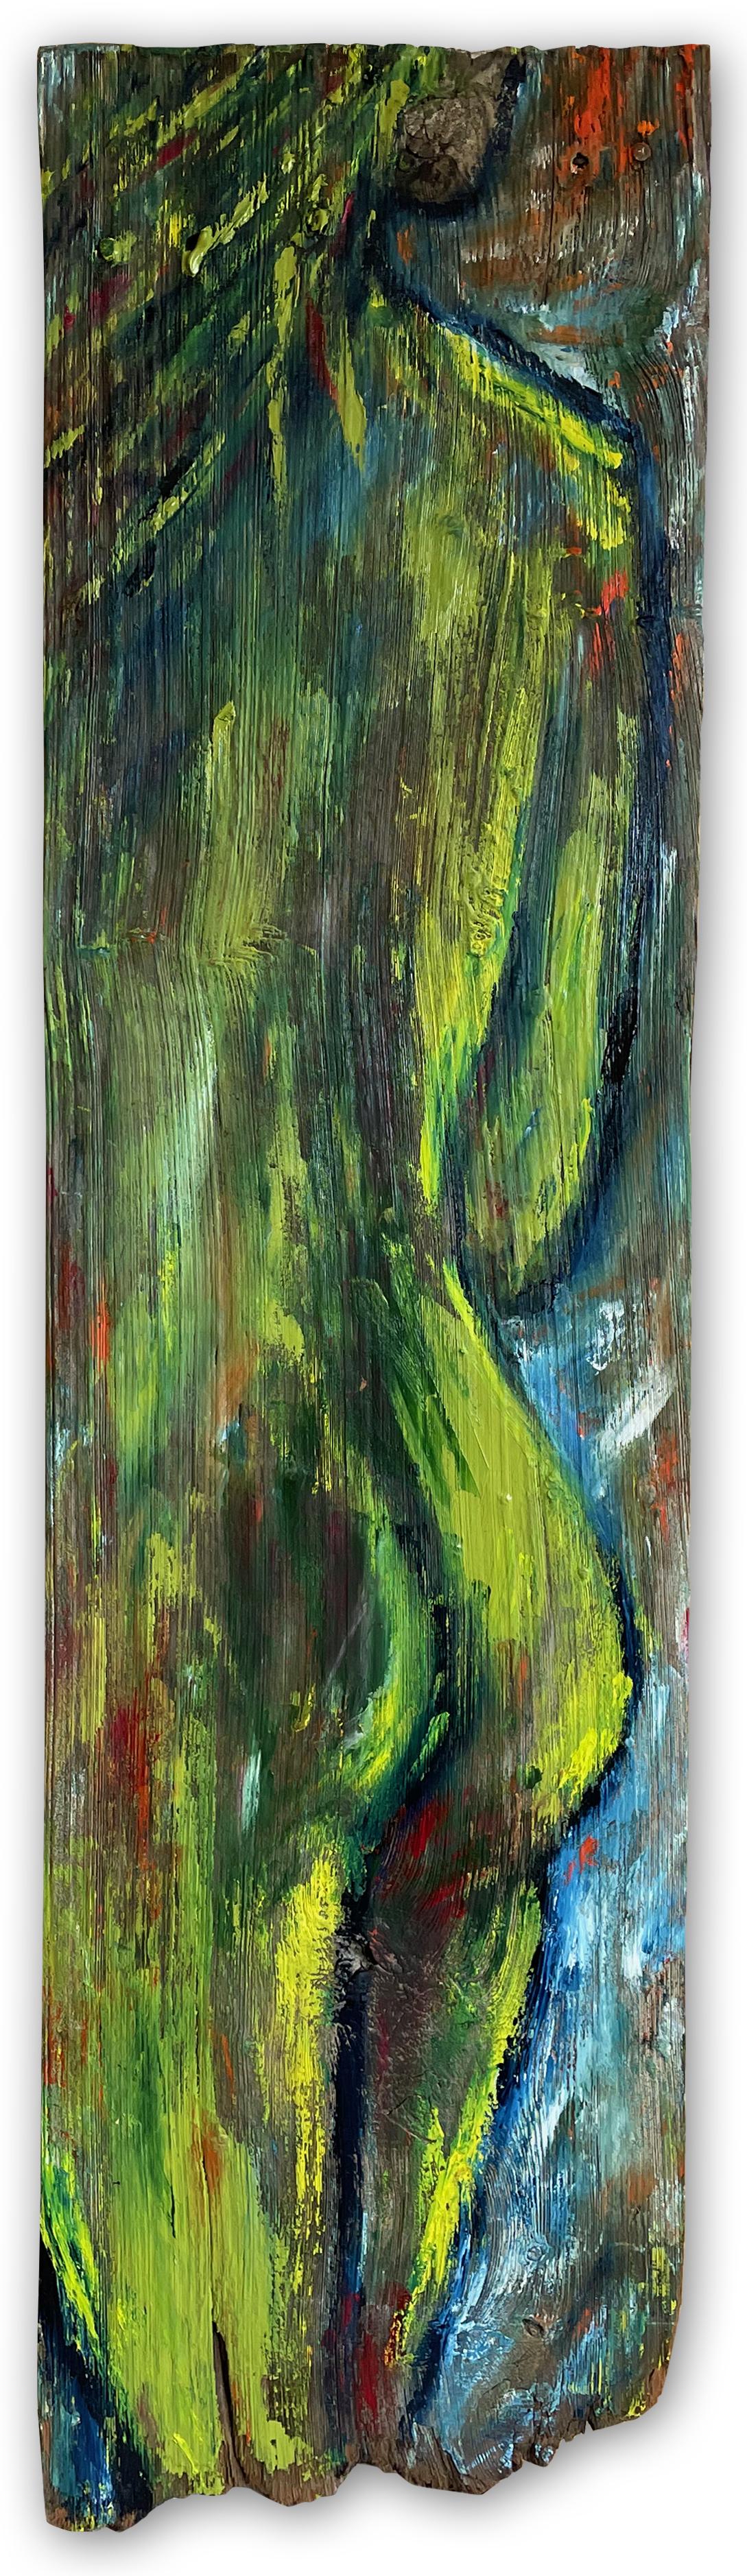 "Envious" by Kristy Chettle is a striking contemporary figurative nude that marries the raw textures of reclaimed wood with the fluidity of oil paint. The elongated 46" x 12" composition showcases Chettle's unique style of emphasizing organic